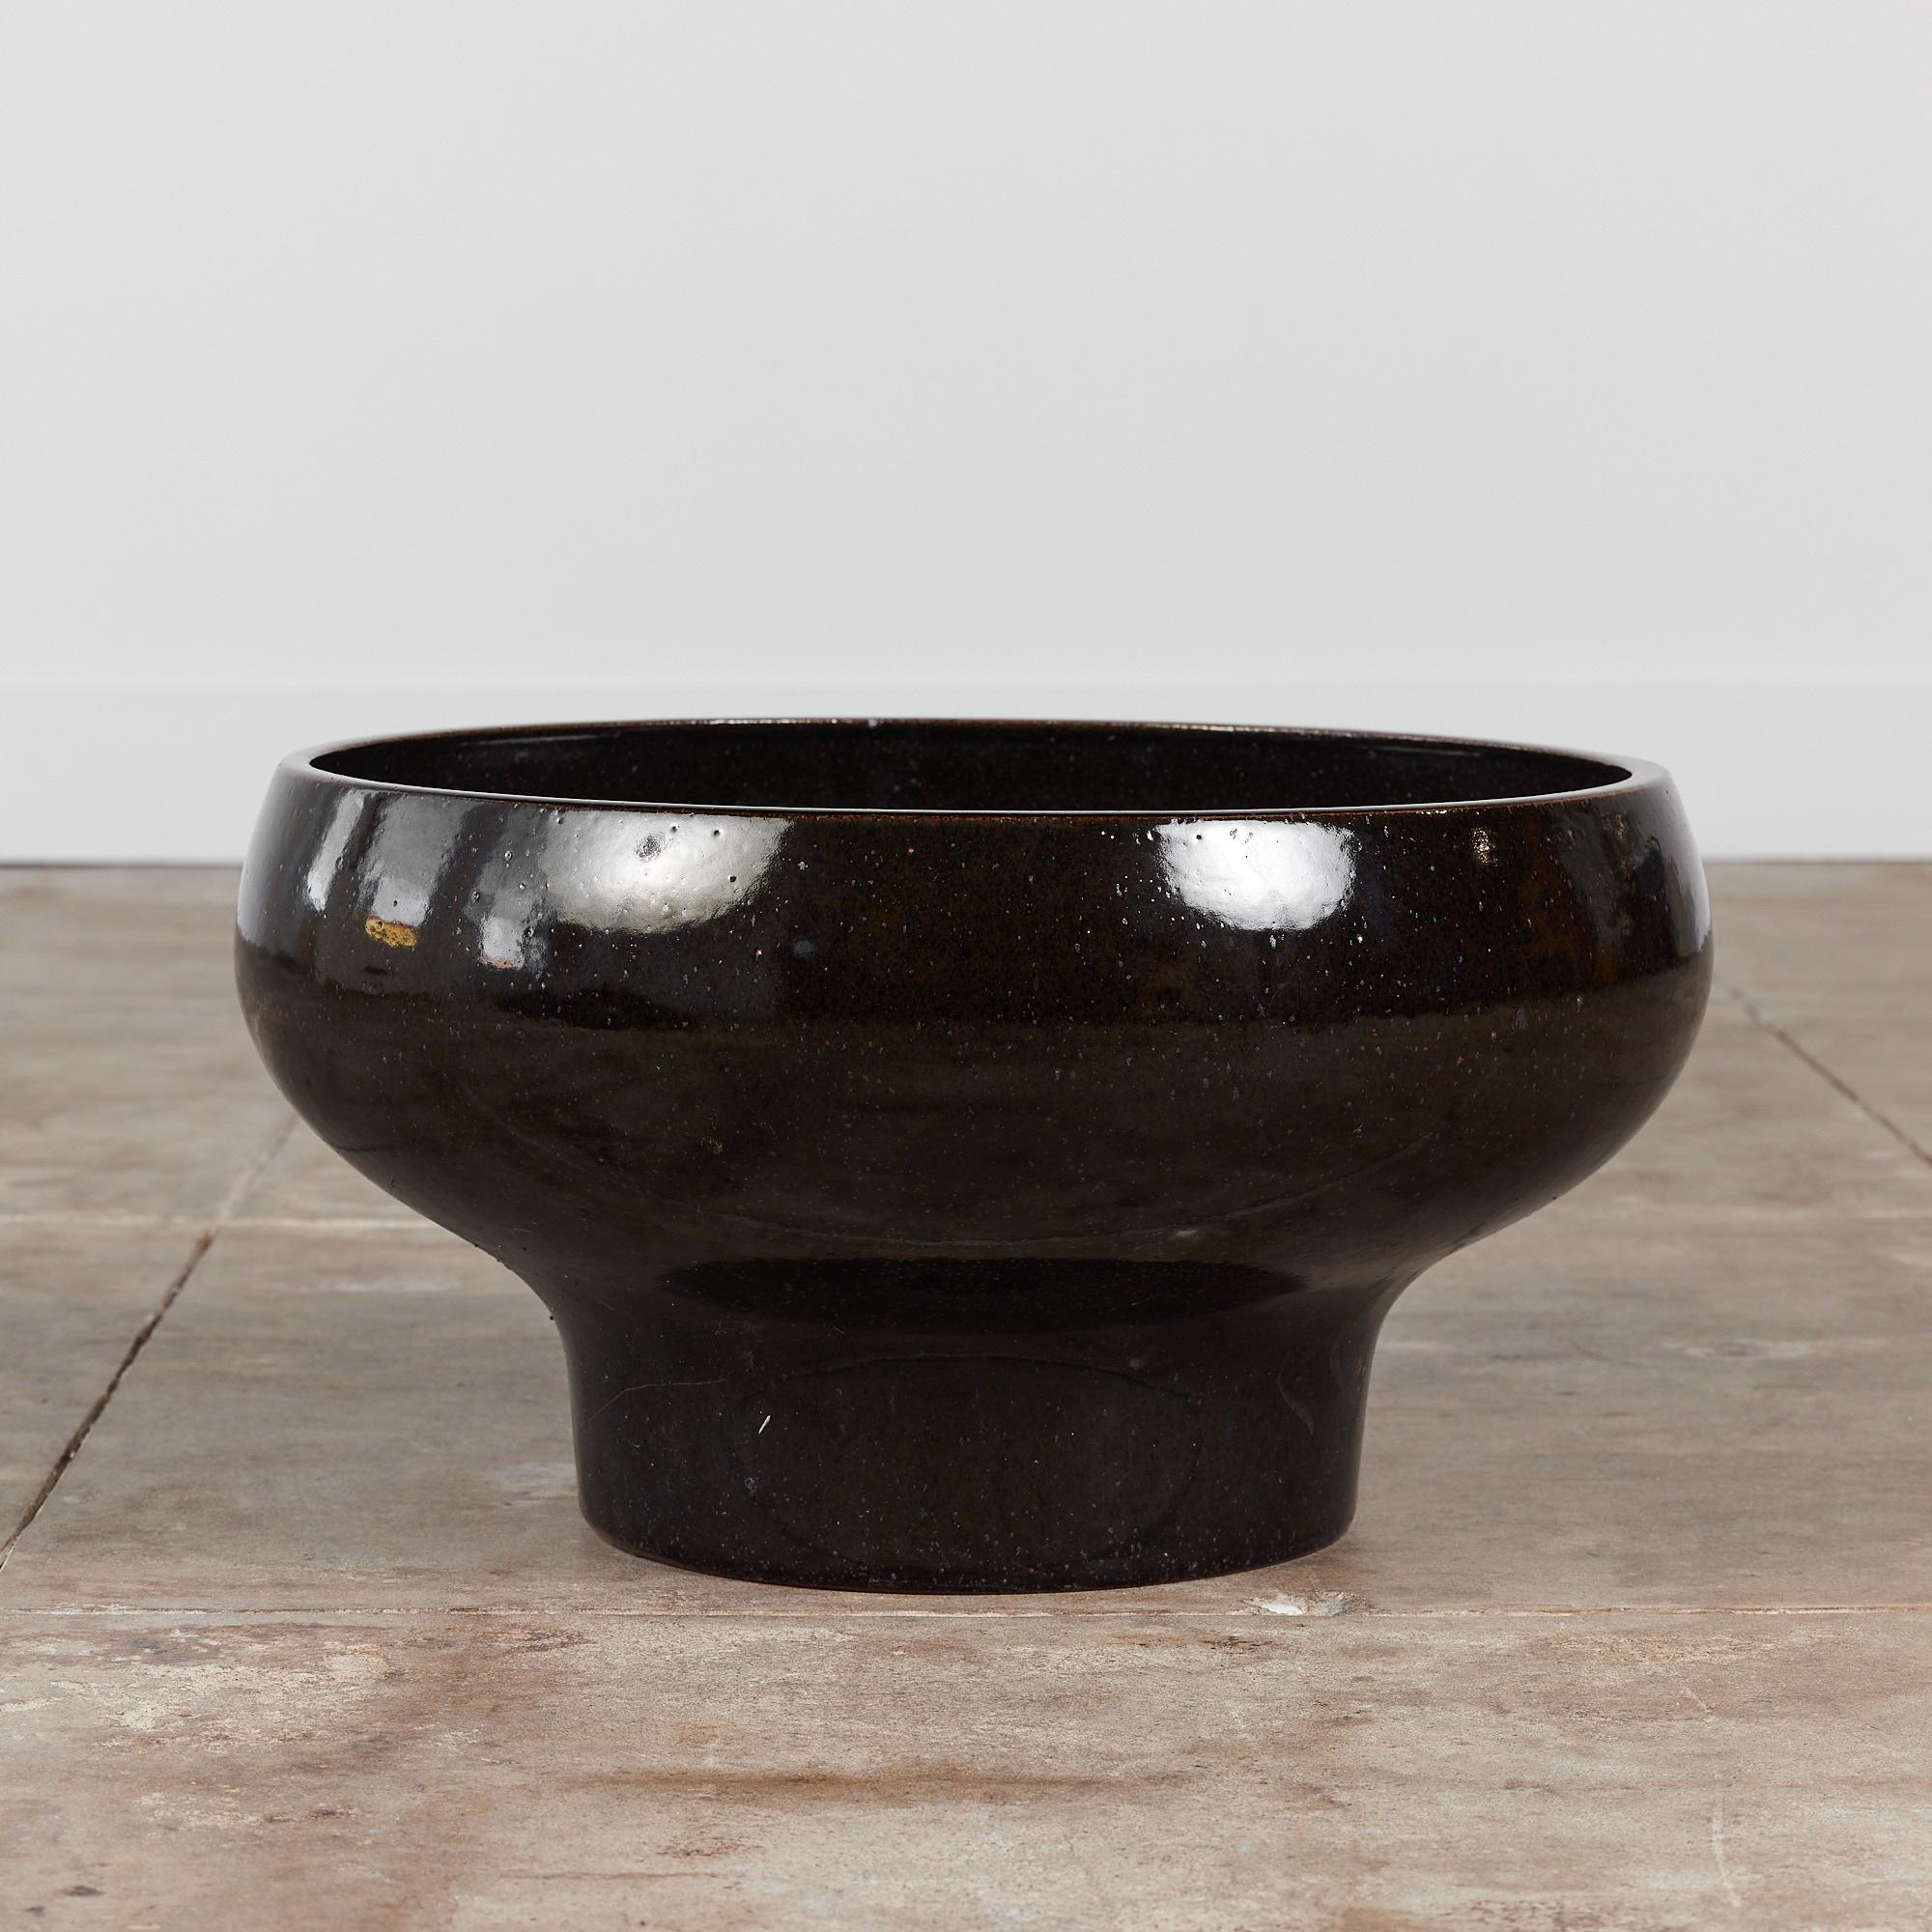 Ceramic planter from David Cressey's Pro/Artisan collection for Architectural Pottery. The 4066 pedestal bowl planter has a wide belly that tapers at the base with a charcoal glazed exterior and interior.

Dimensions
21.75